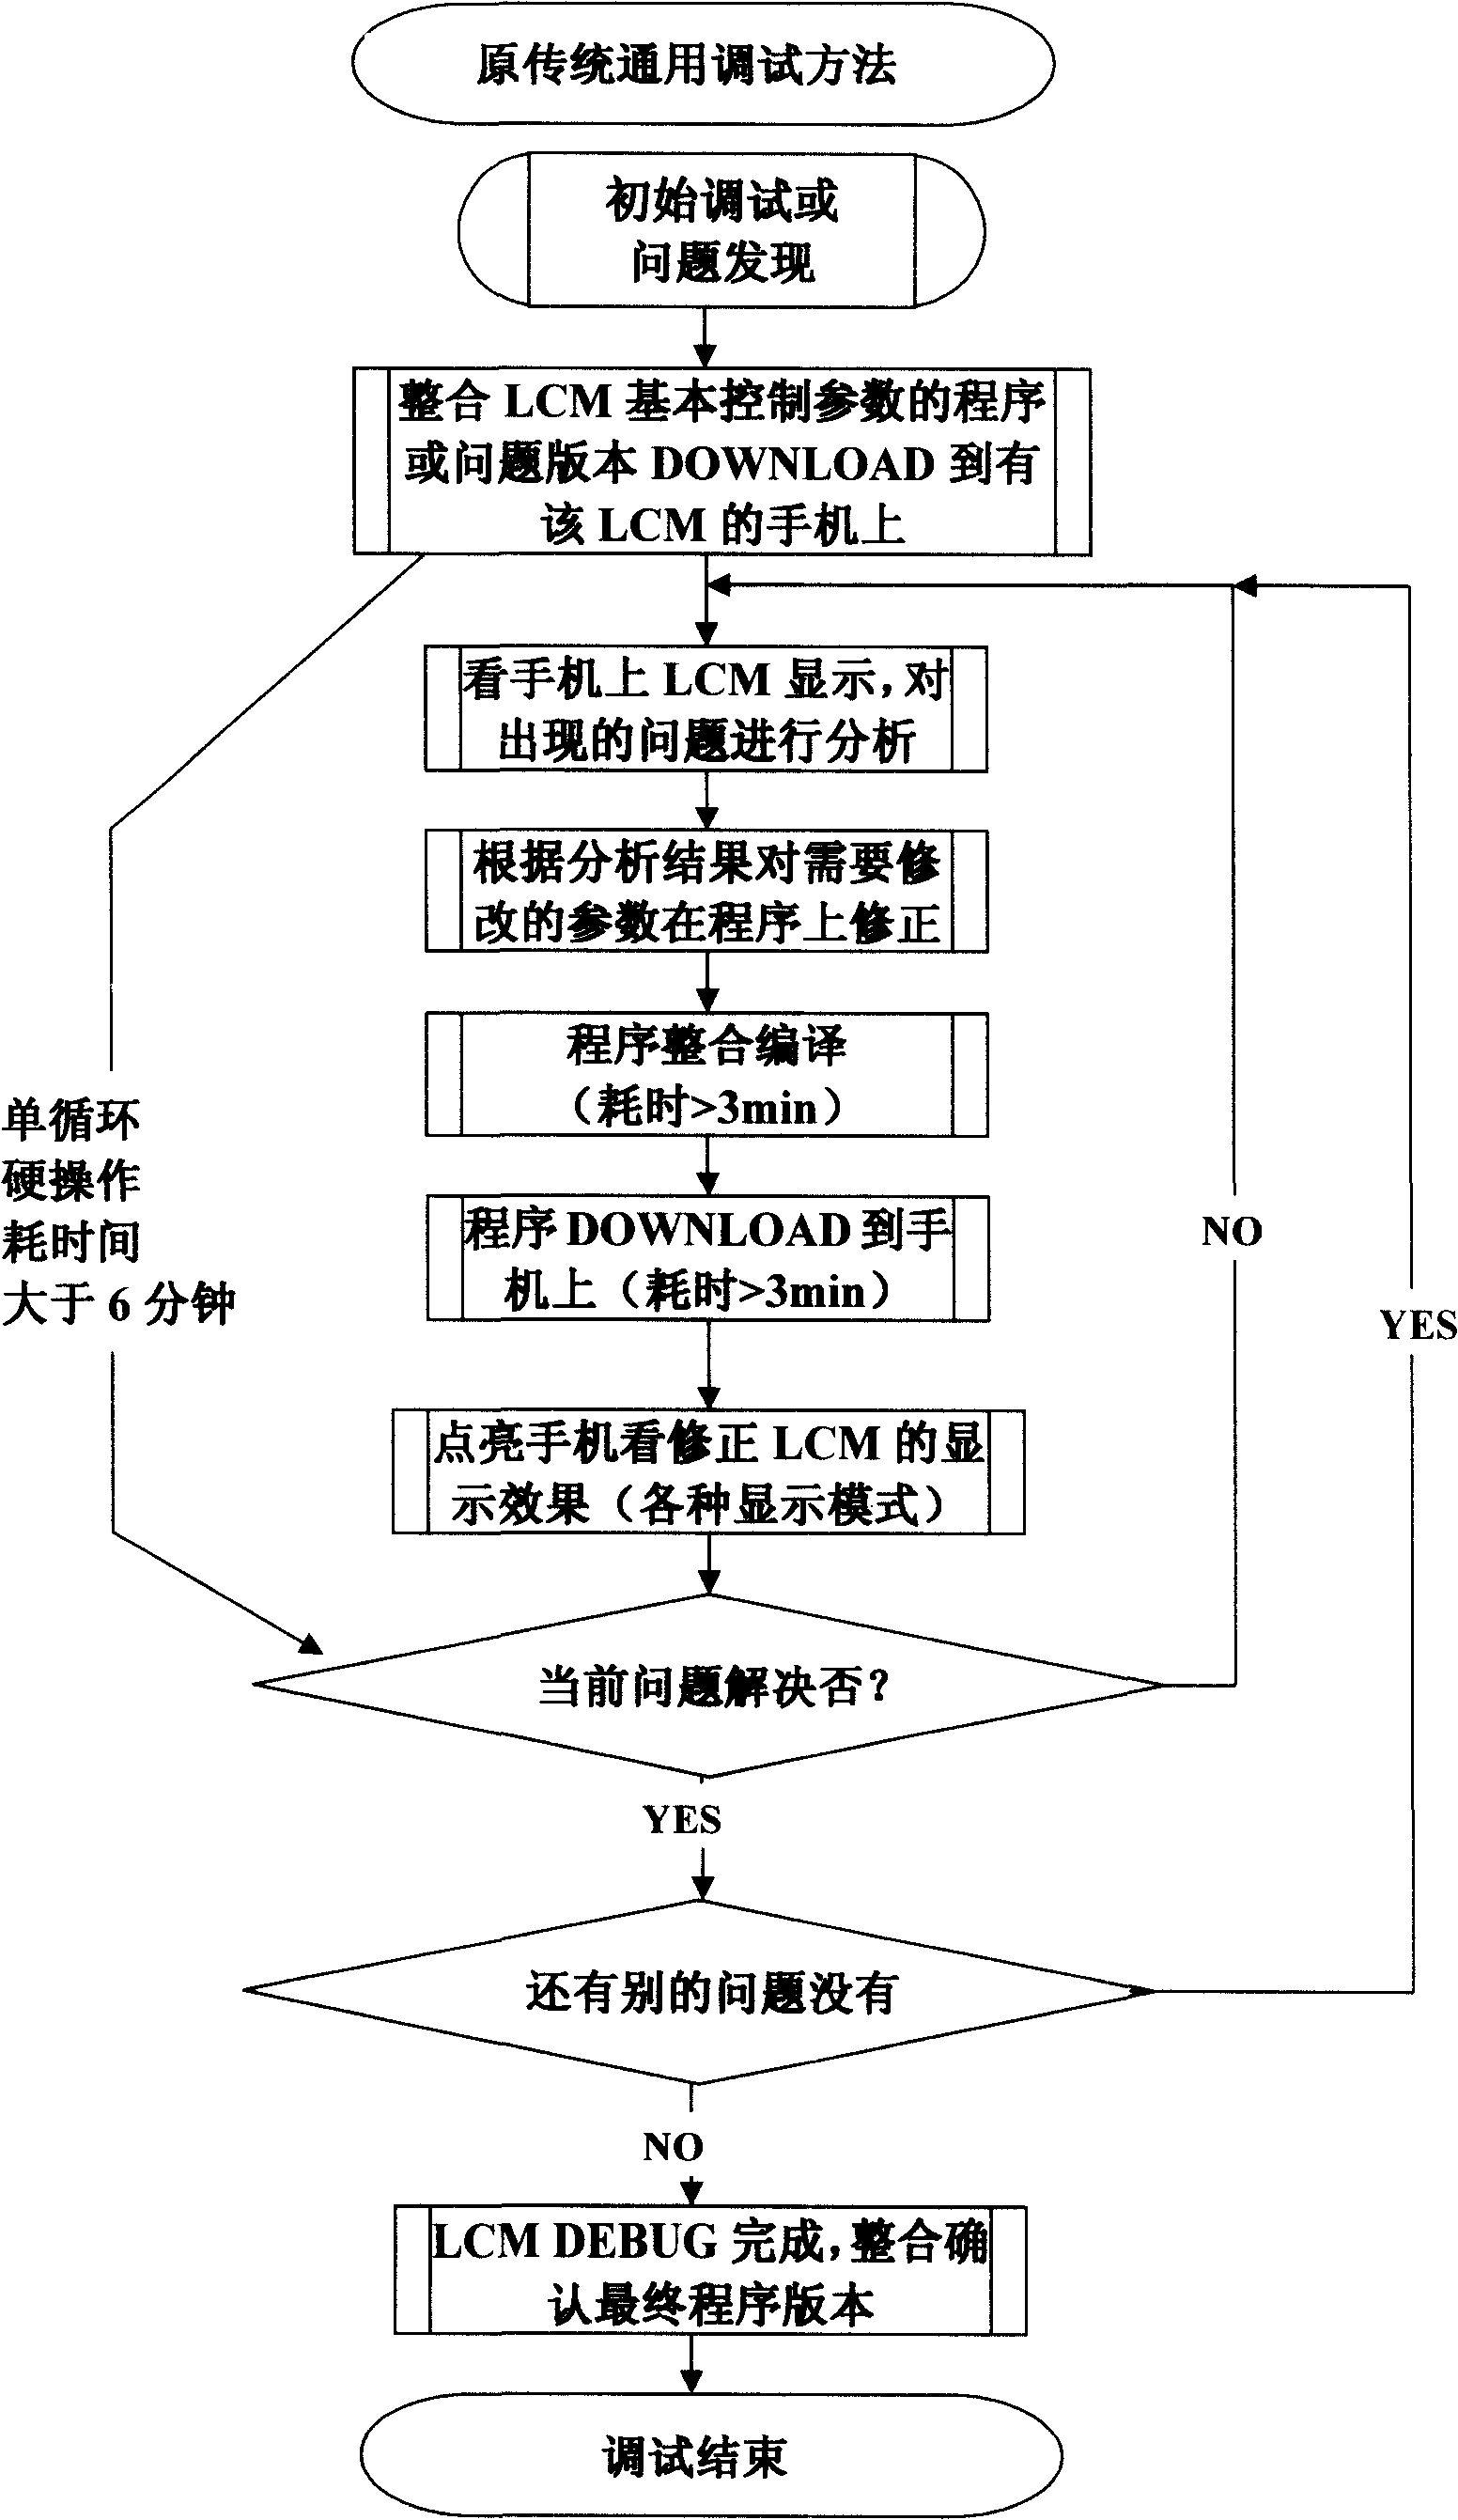 Method for rapidly debugging liquid crystal screen embedded with mobile phone platform